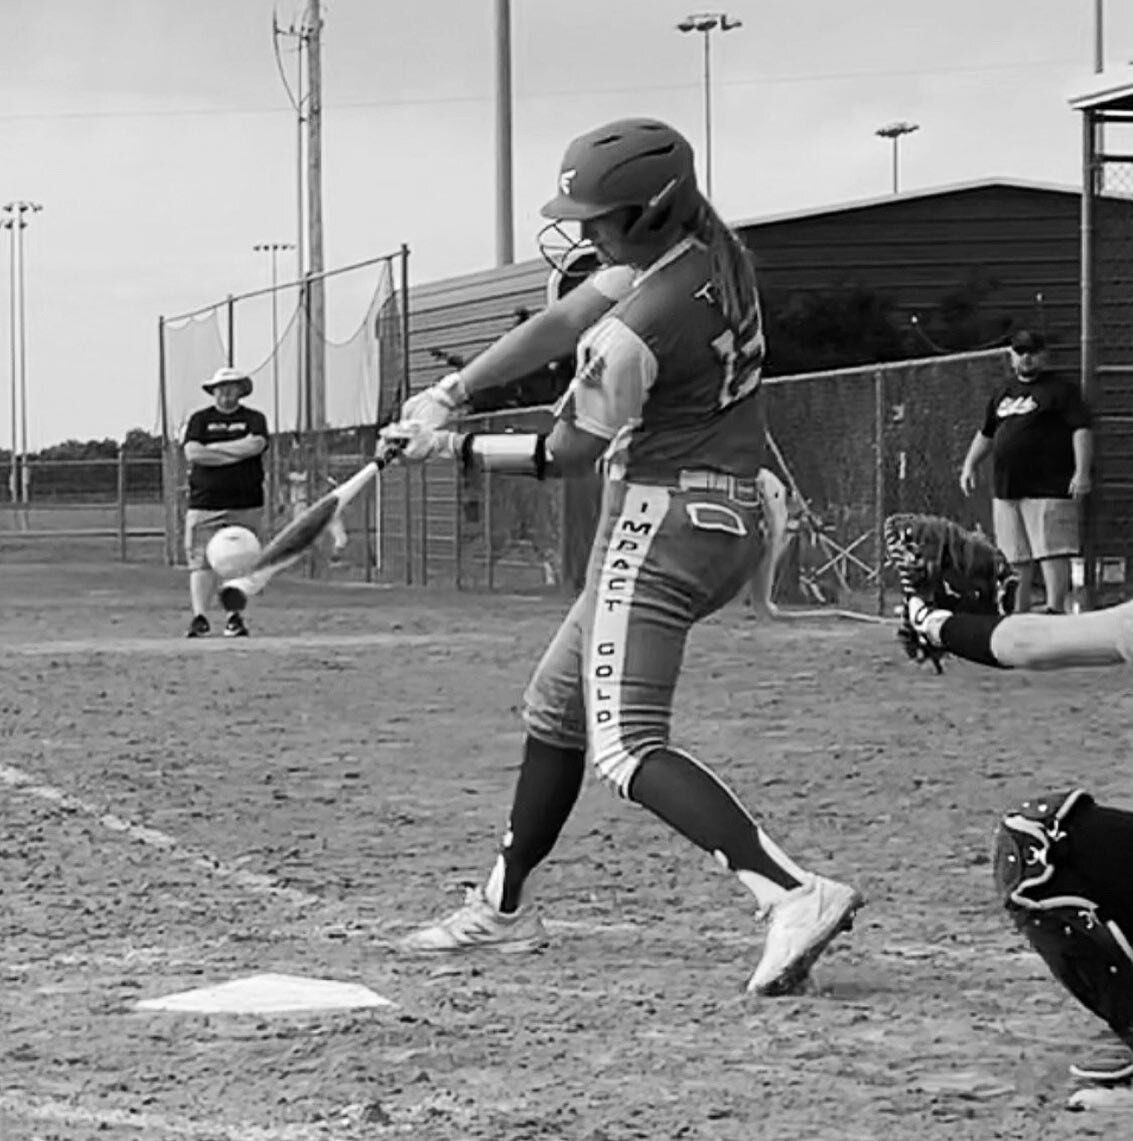 STUDENT FEATURE &mdash;

Emma Trine (@emmatrine_), 2023 first baseman out of Broken Arrow, OK.

At a towering 6&rsquo; tall, Emma delivers some SERIOUS power from the left side. Don&rsquo;t let her gentle demeanor off the field fool you... she knows 